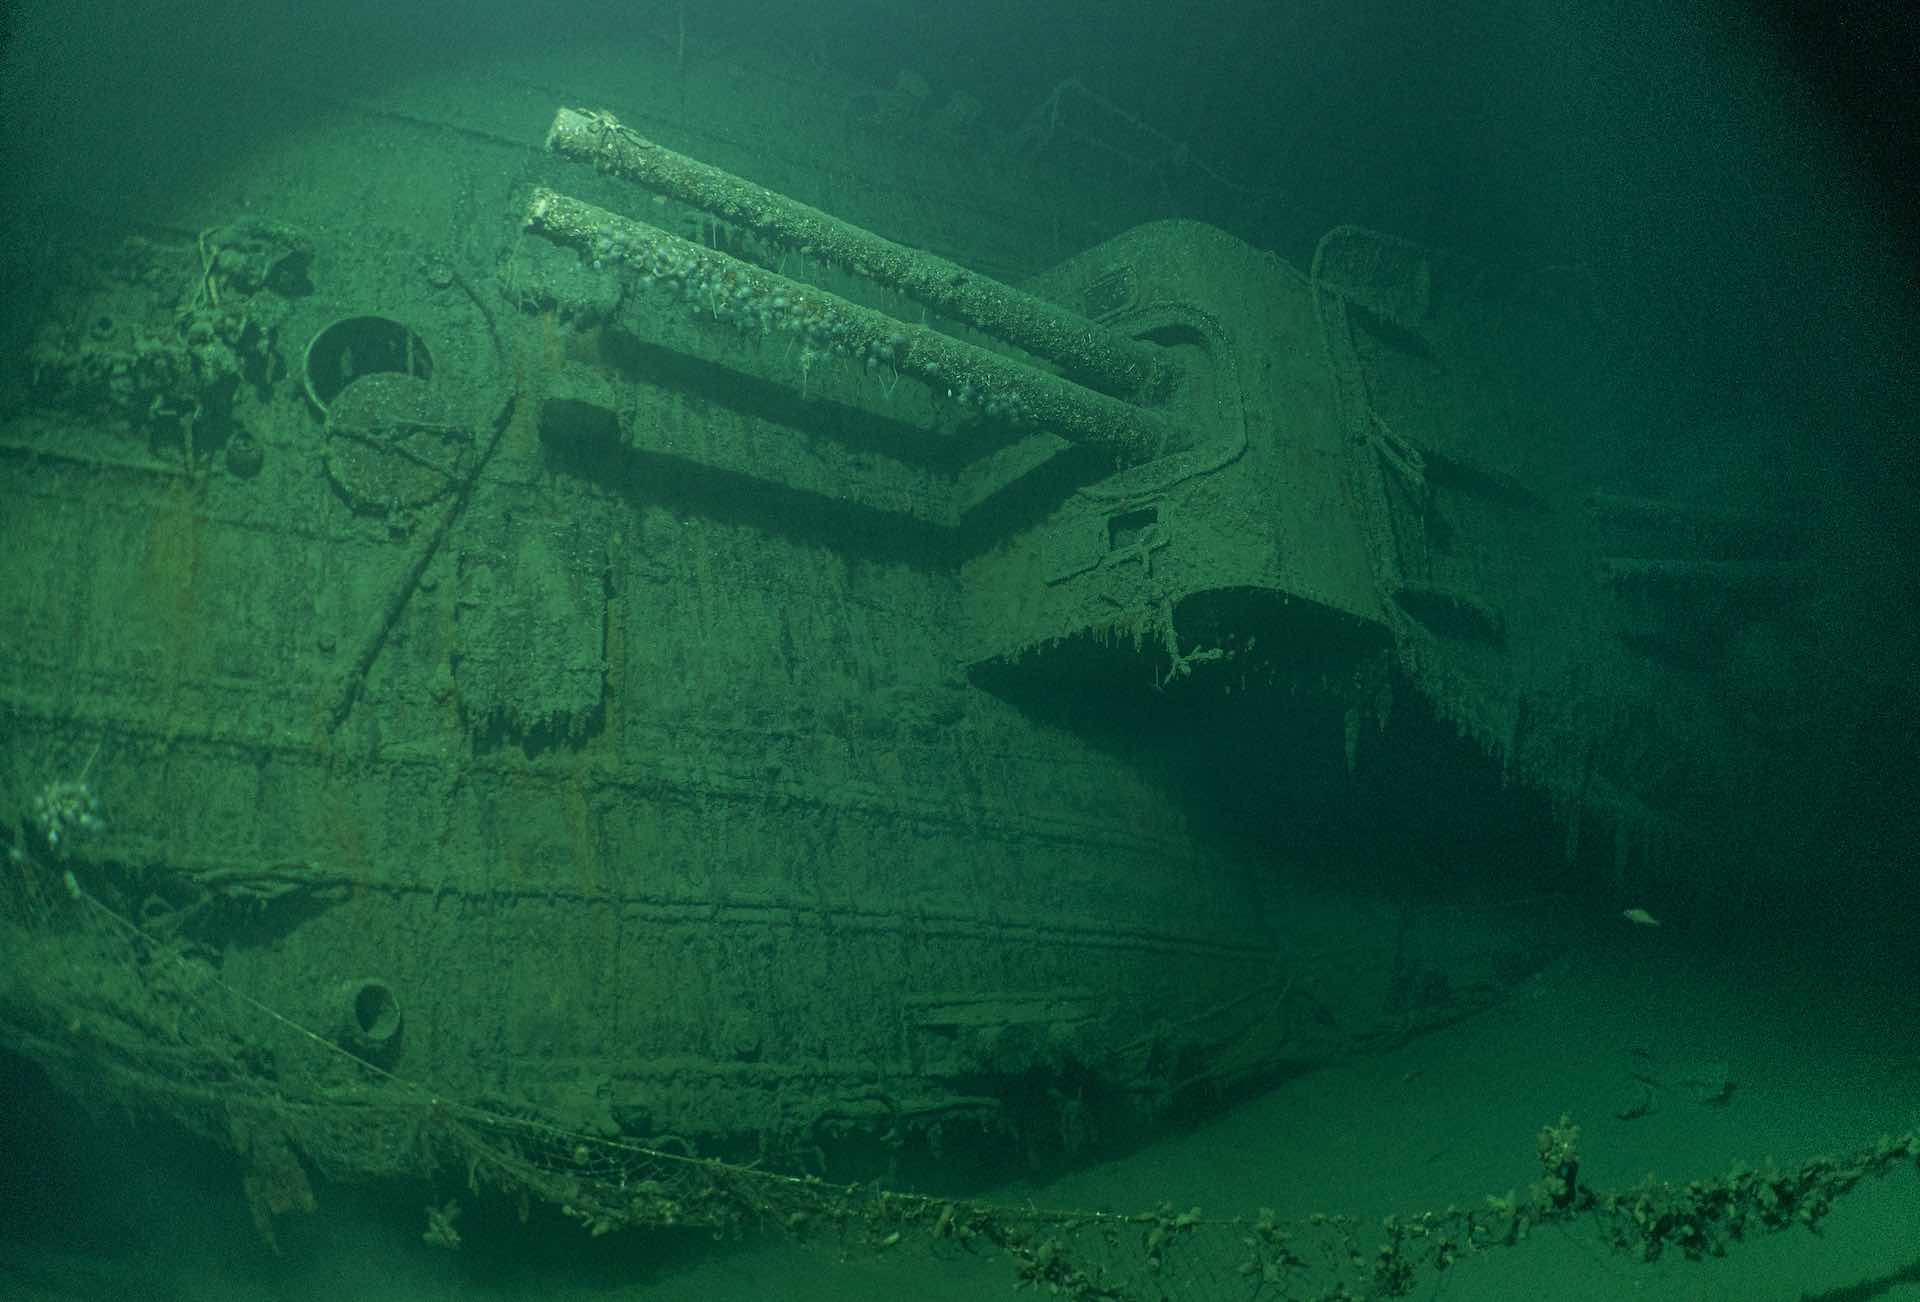 The cannons on the wreck Orp Grom - Narvik